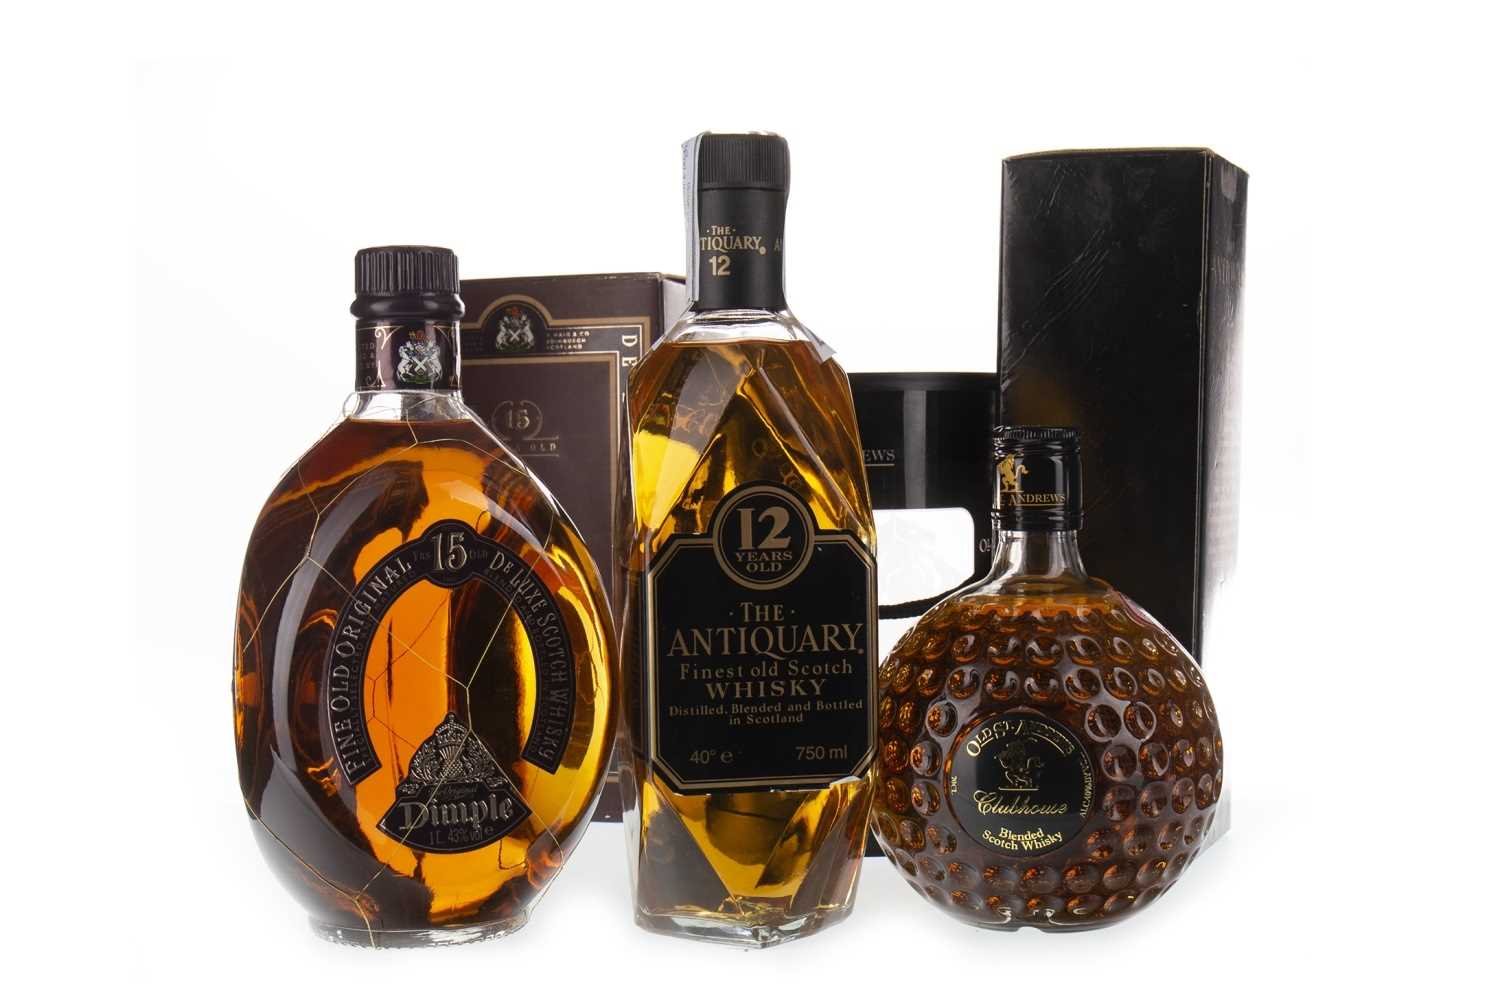 Lot 402 - DIMPLE 15 YEARS OLD, OLD ST ANDREWS AND ANTIQUARY 12 YEARS OLD